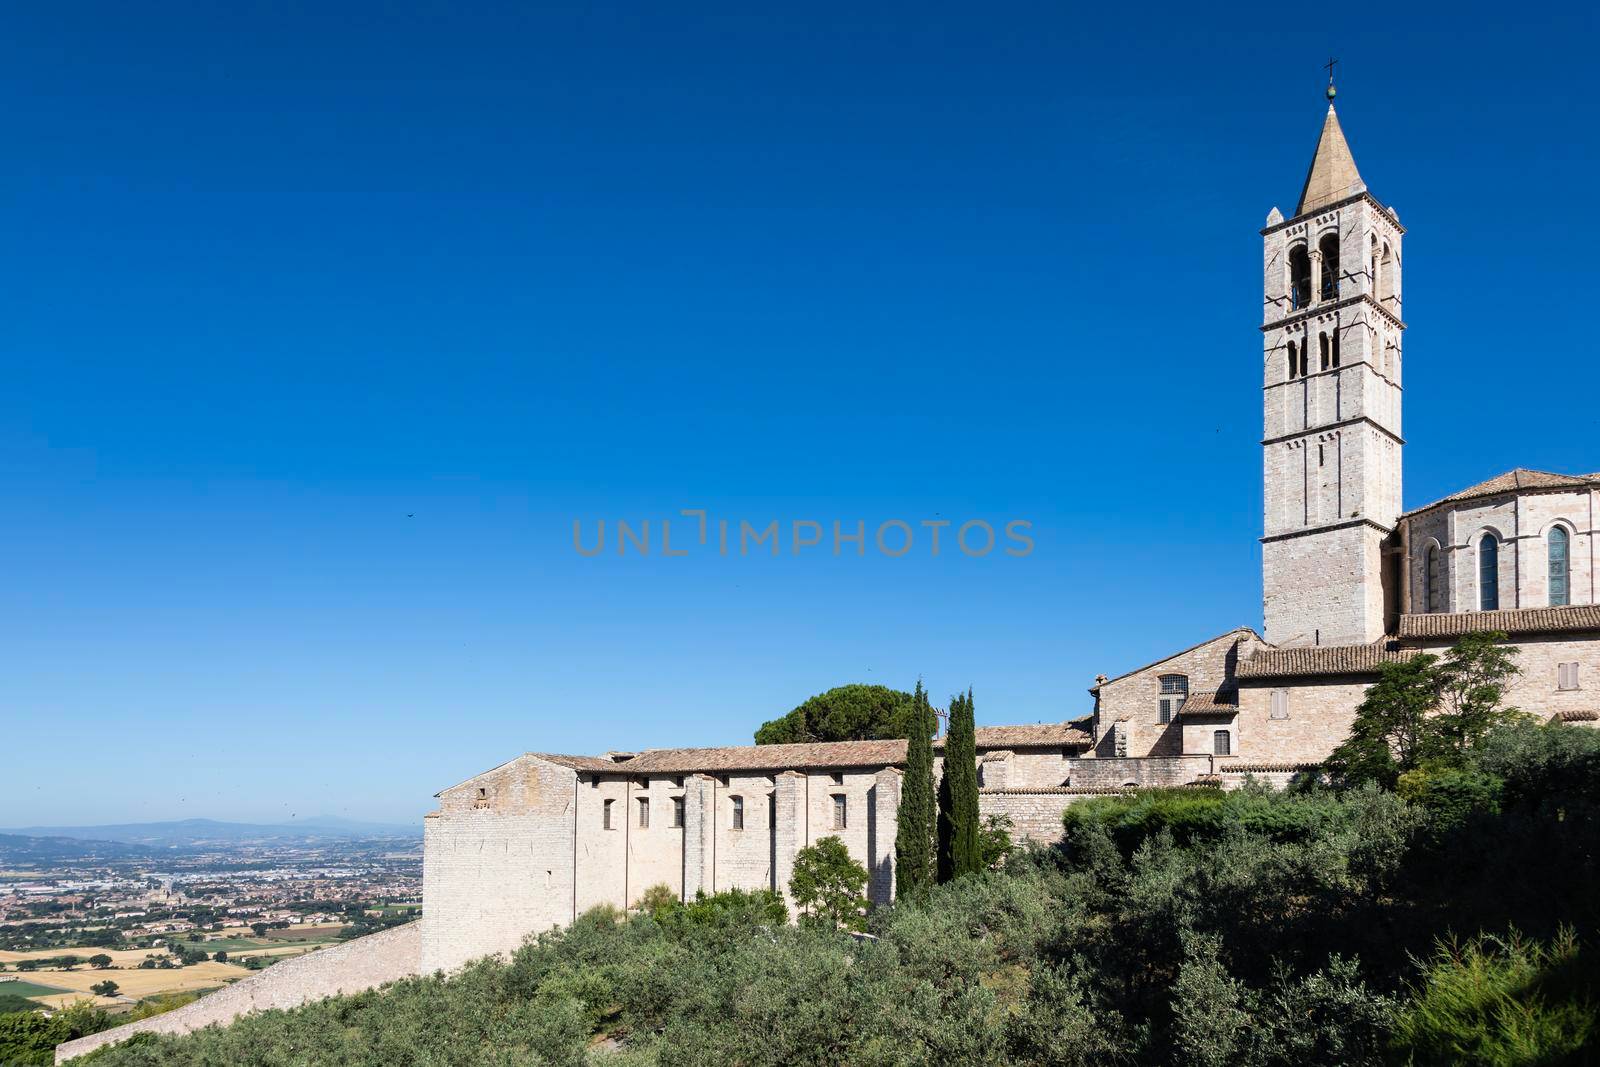 Church in Assisi village in Umbria region, Italy. The town is famous for the most important Italian St. Francis Basilica (Basilica di San Francesco)